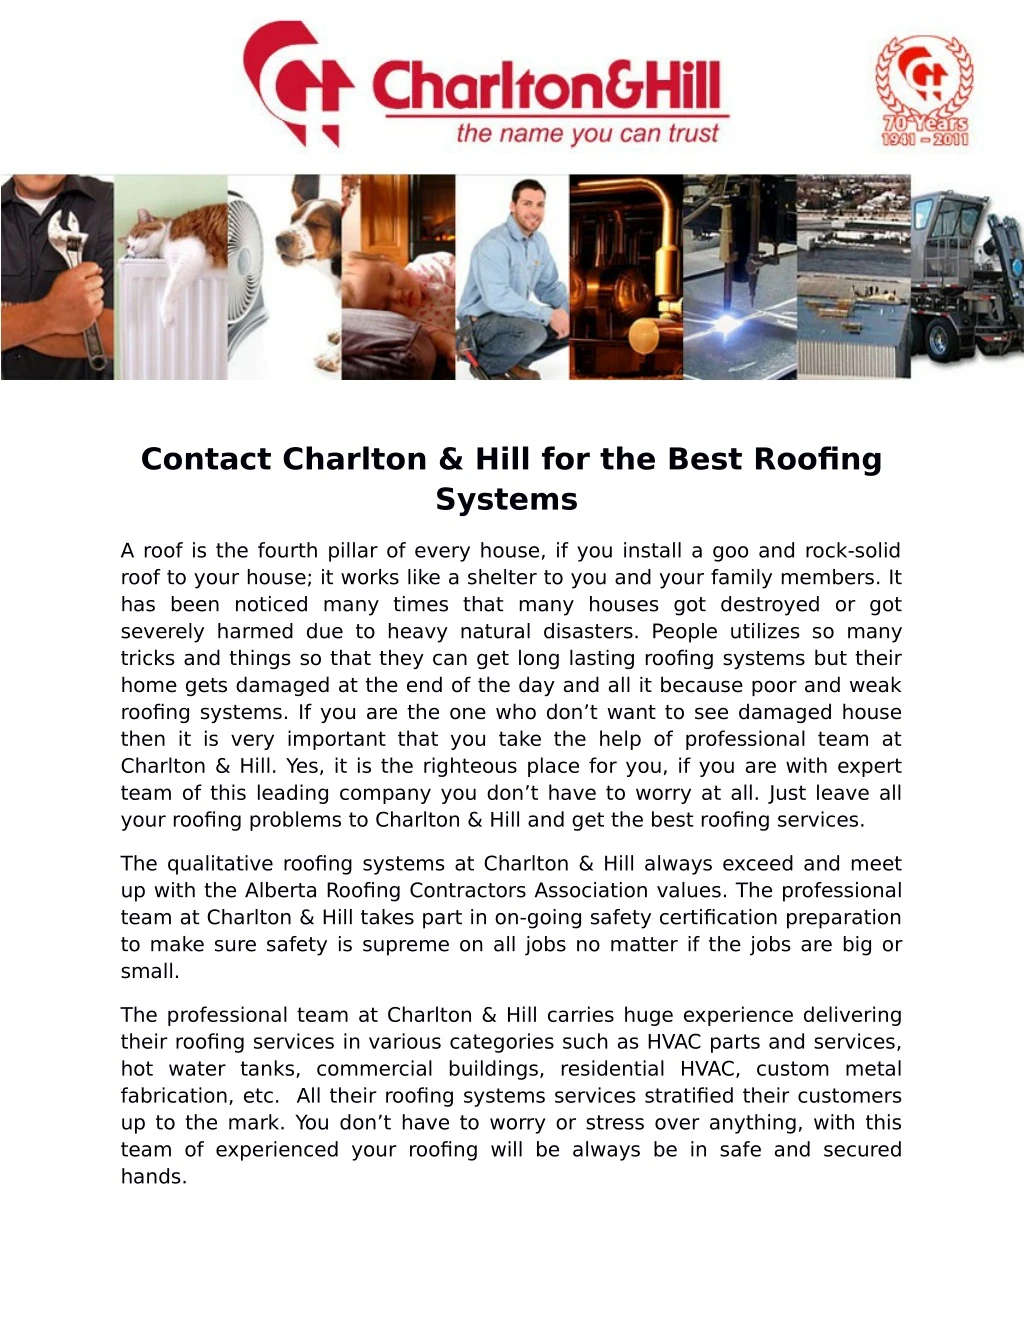 contact charlton hill for the best roofing systems